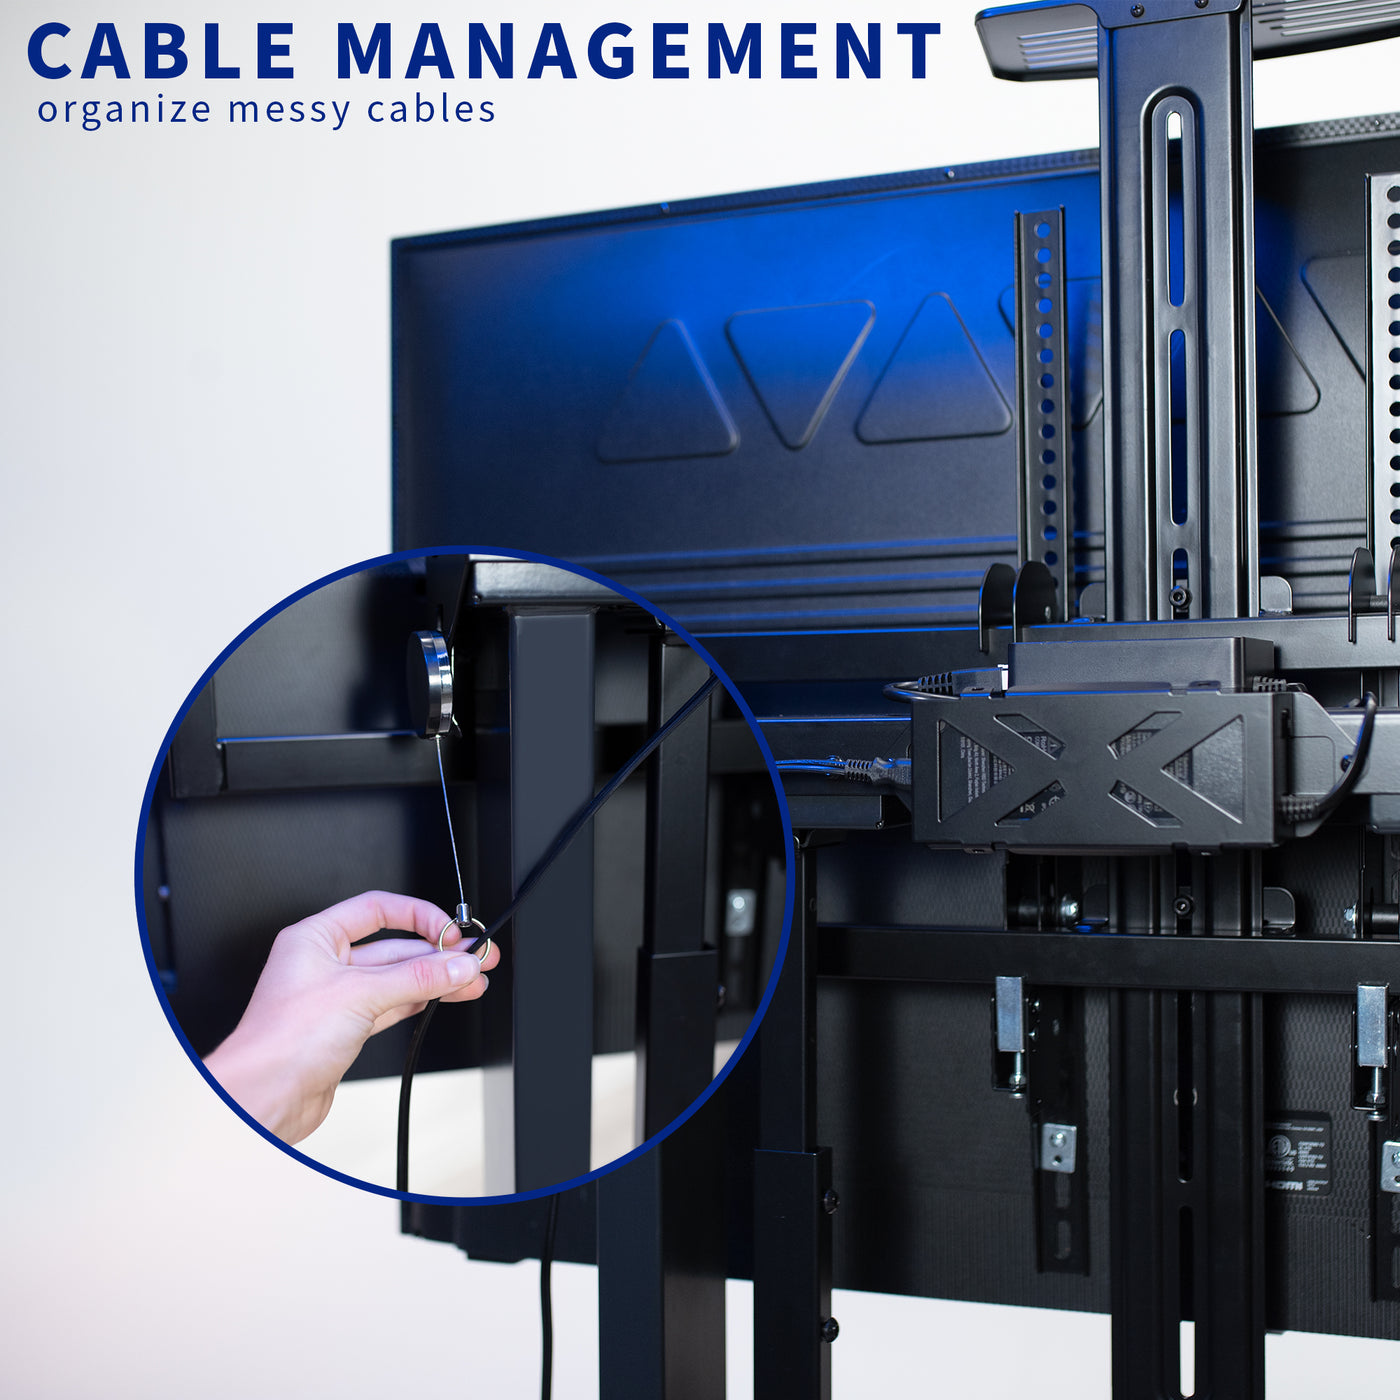 TV cart with built-in cable management to help keep organized.